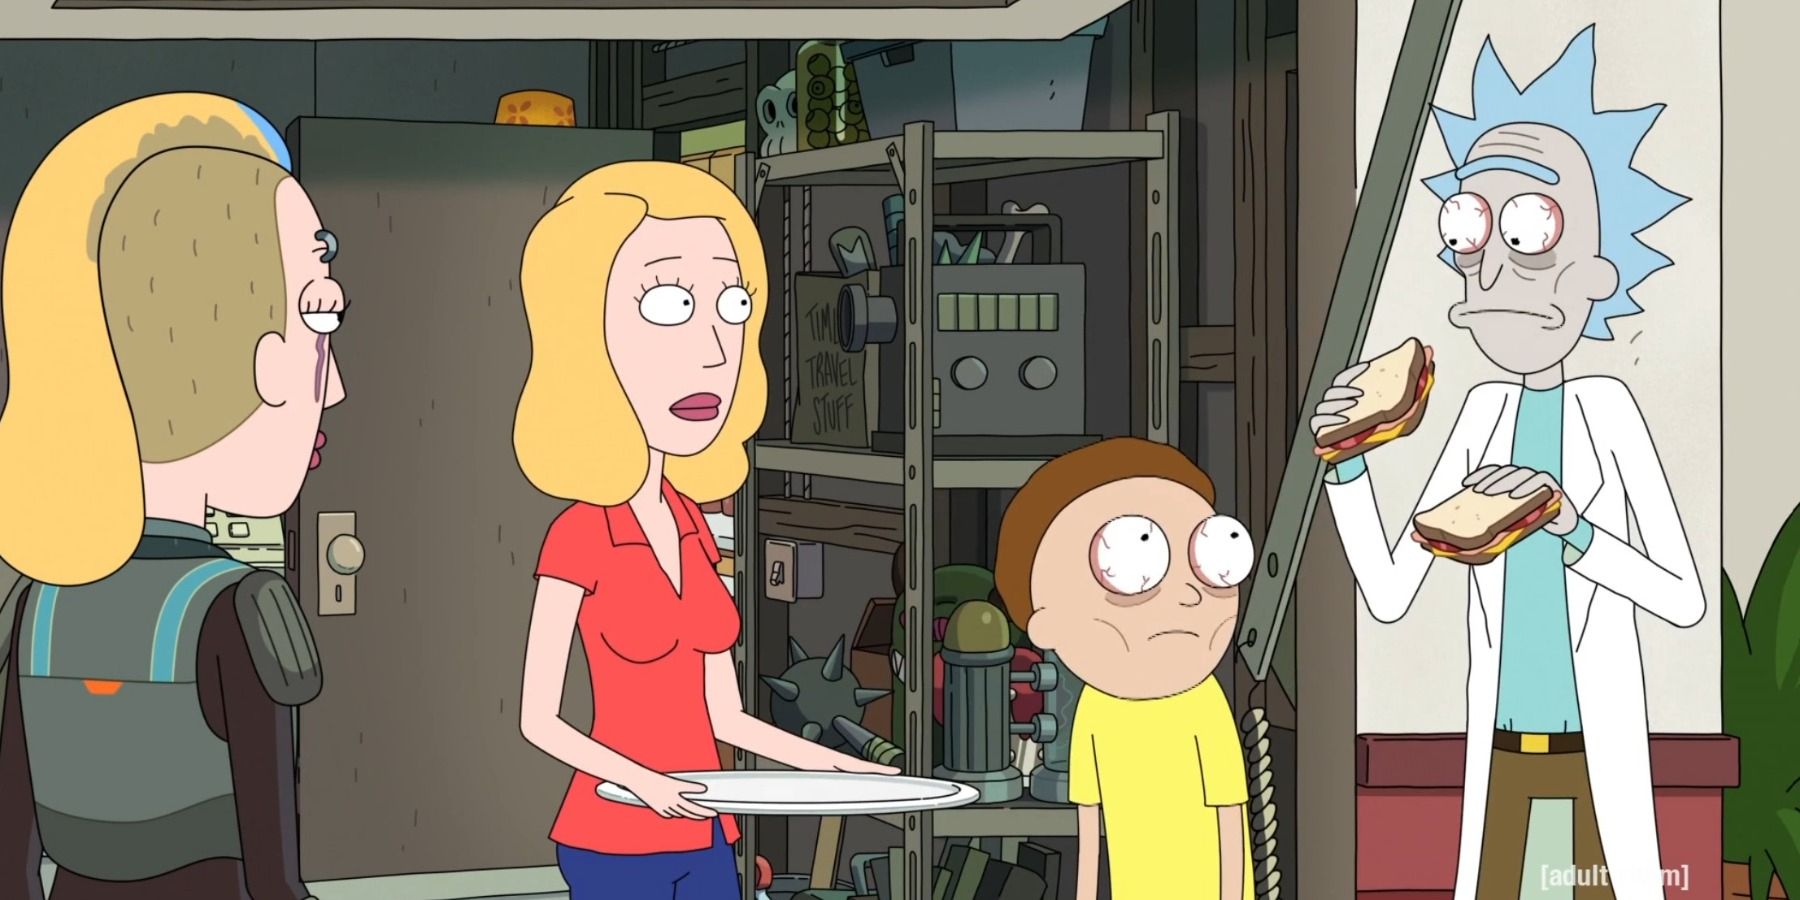 Beth giving starved Rick and Morty sandwiches